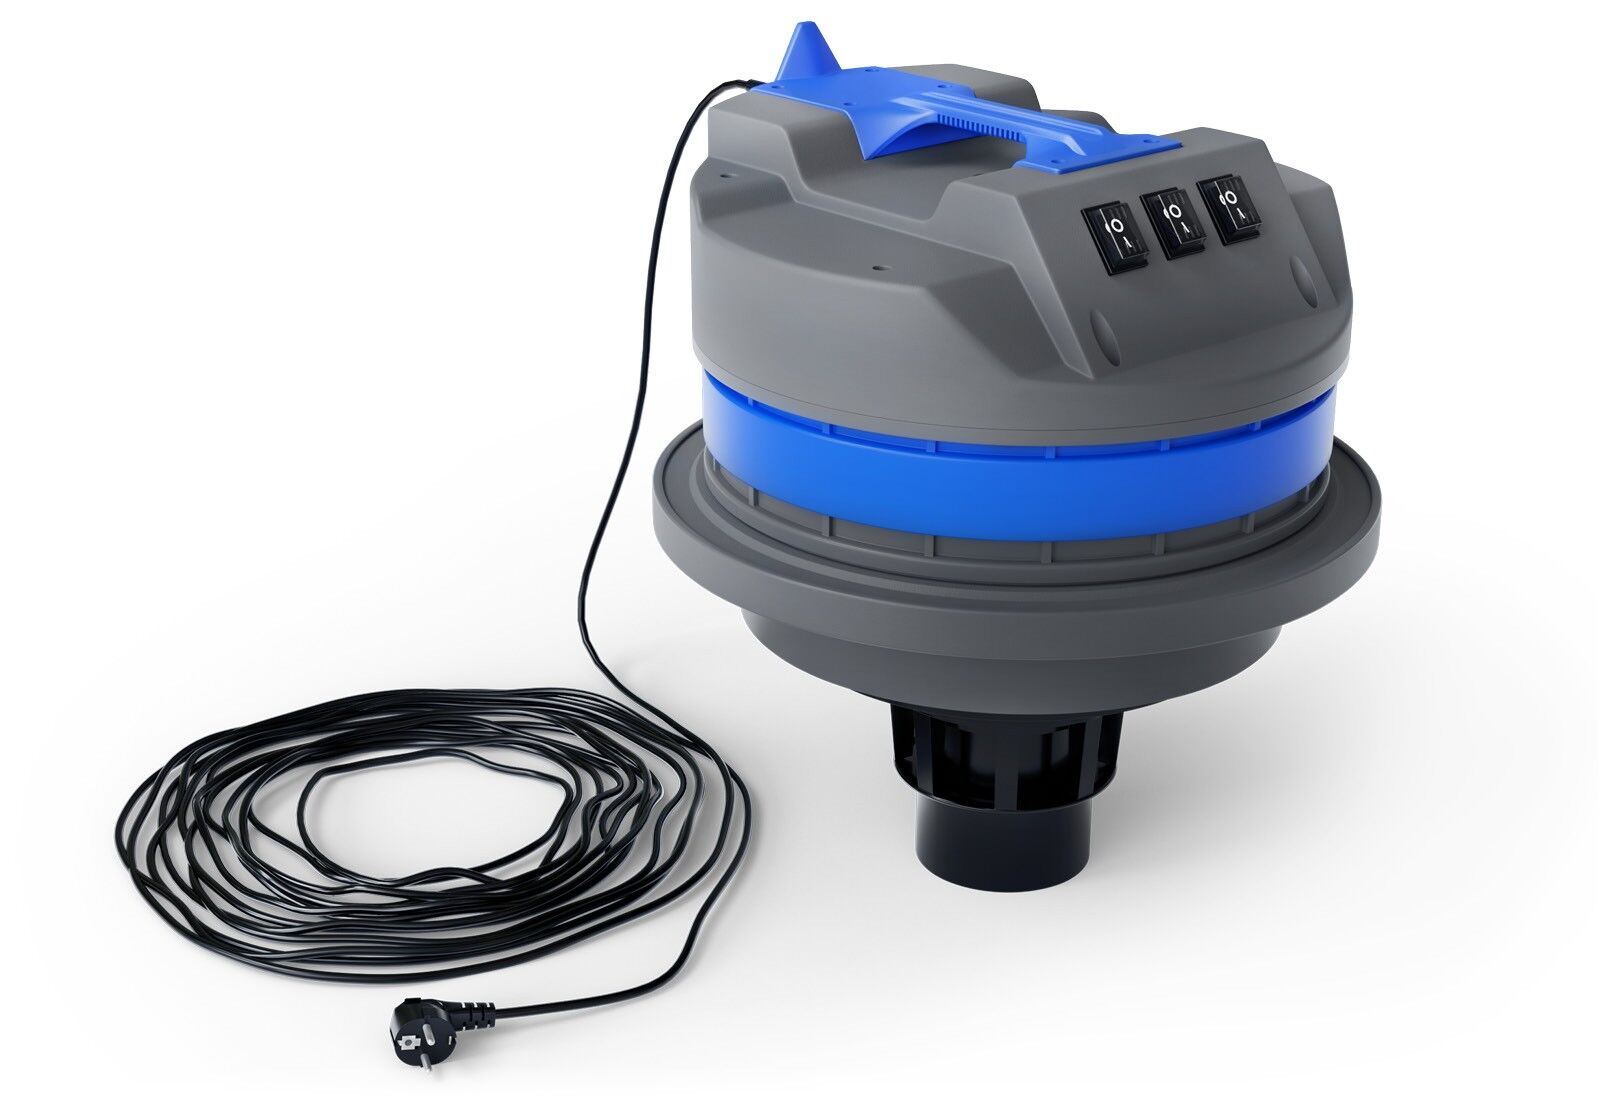 Wet and dry vacuum cleaner NTS80, 3.000 W tipping chassis, 80 l